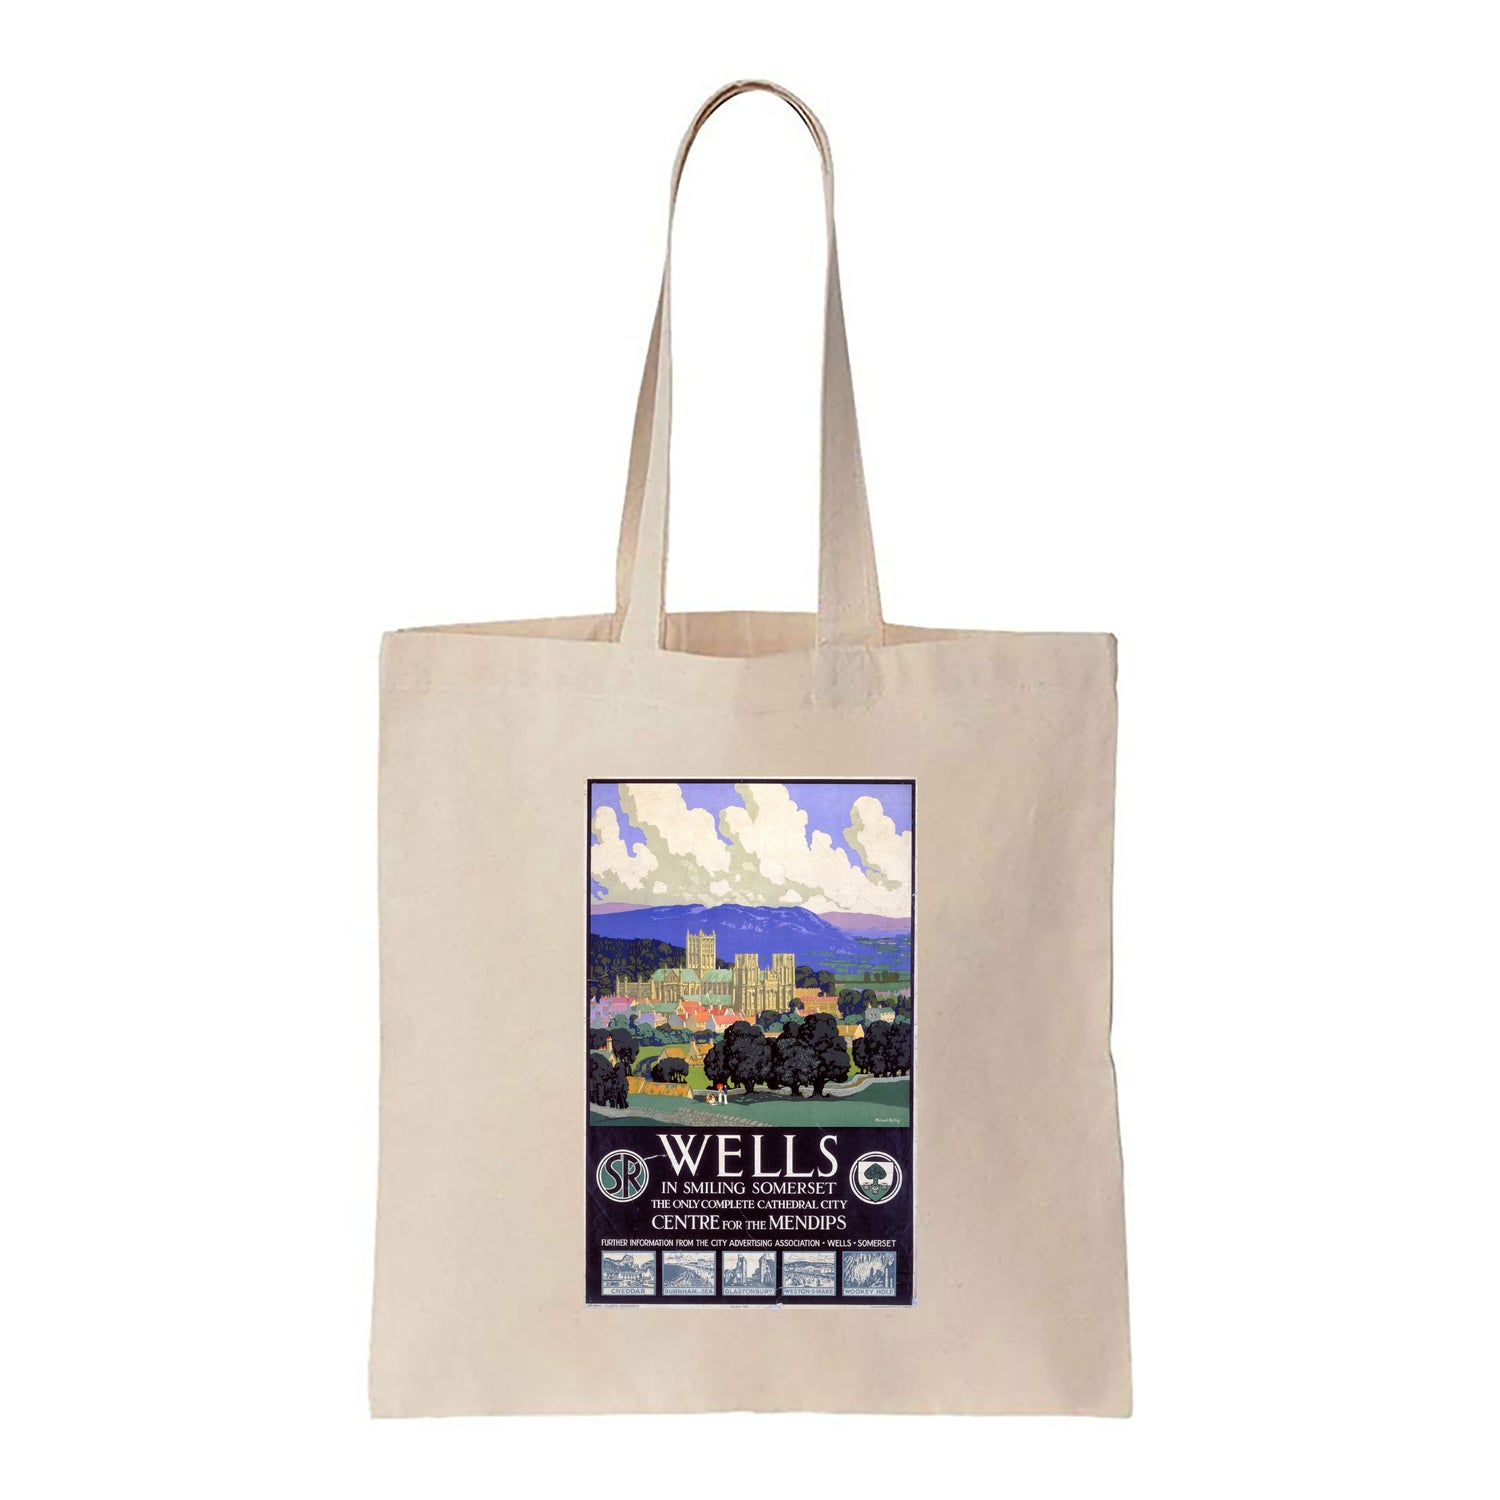 Wells in Smiling Somerset - Canvas Tote Bag